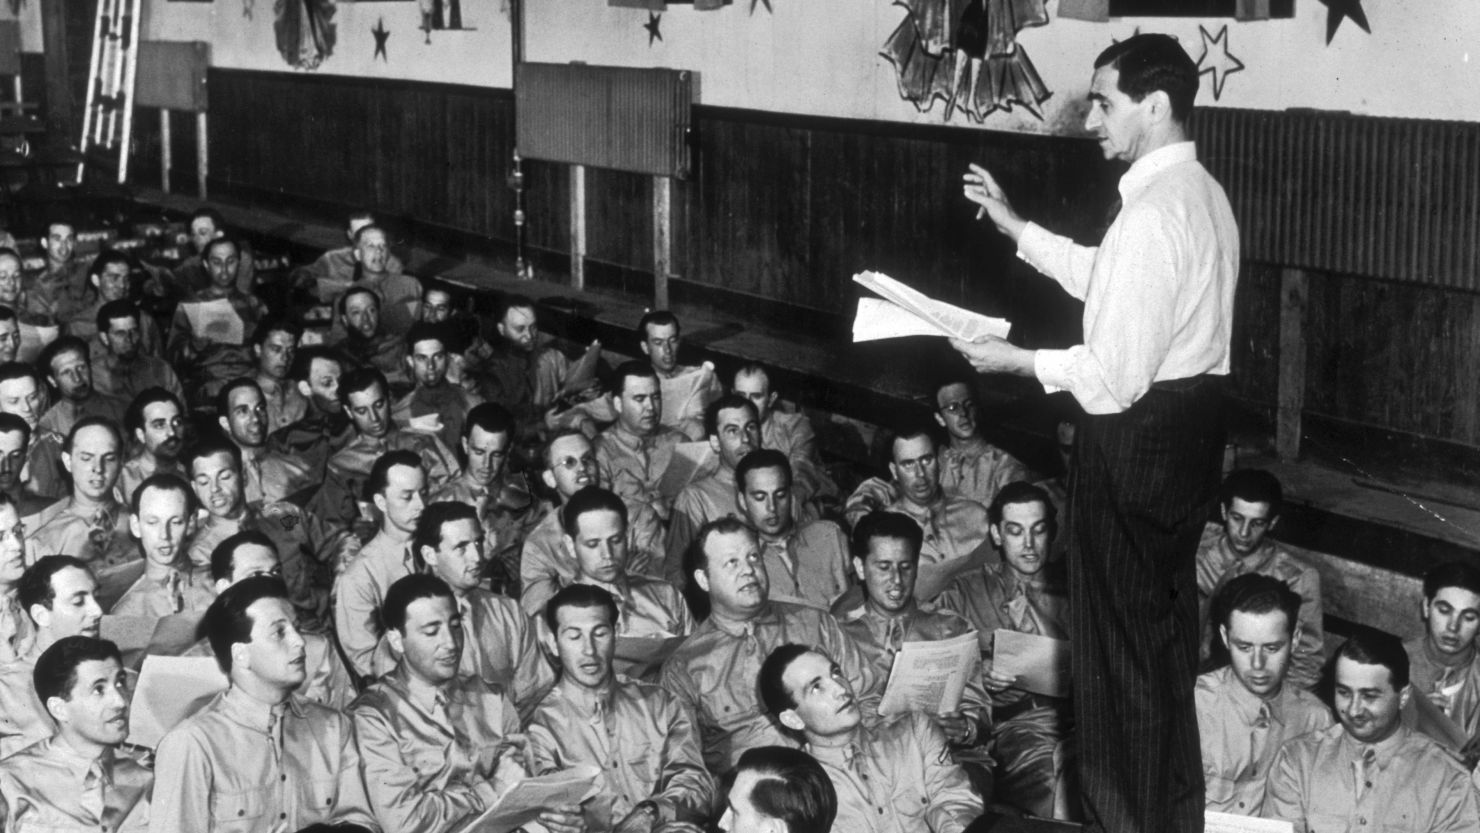 Composer Irving Berlin leads a group of servicemen at Camp Upton on Long Island, New York, in 1942.